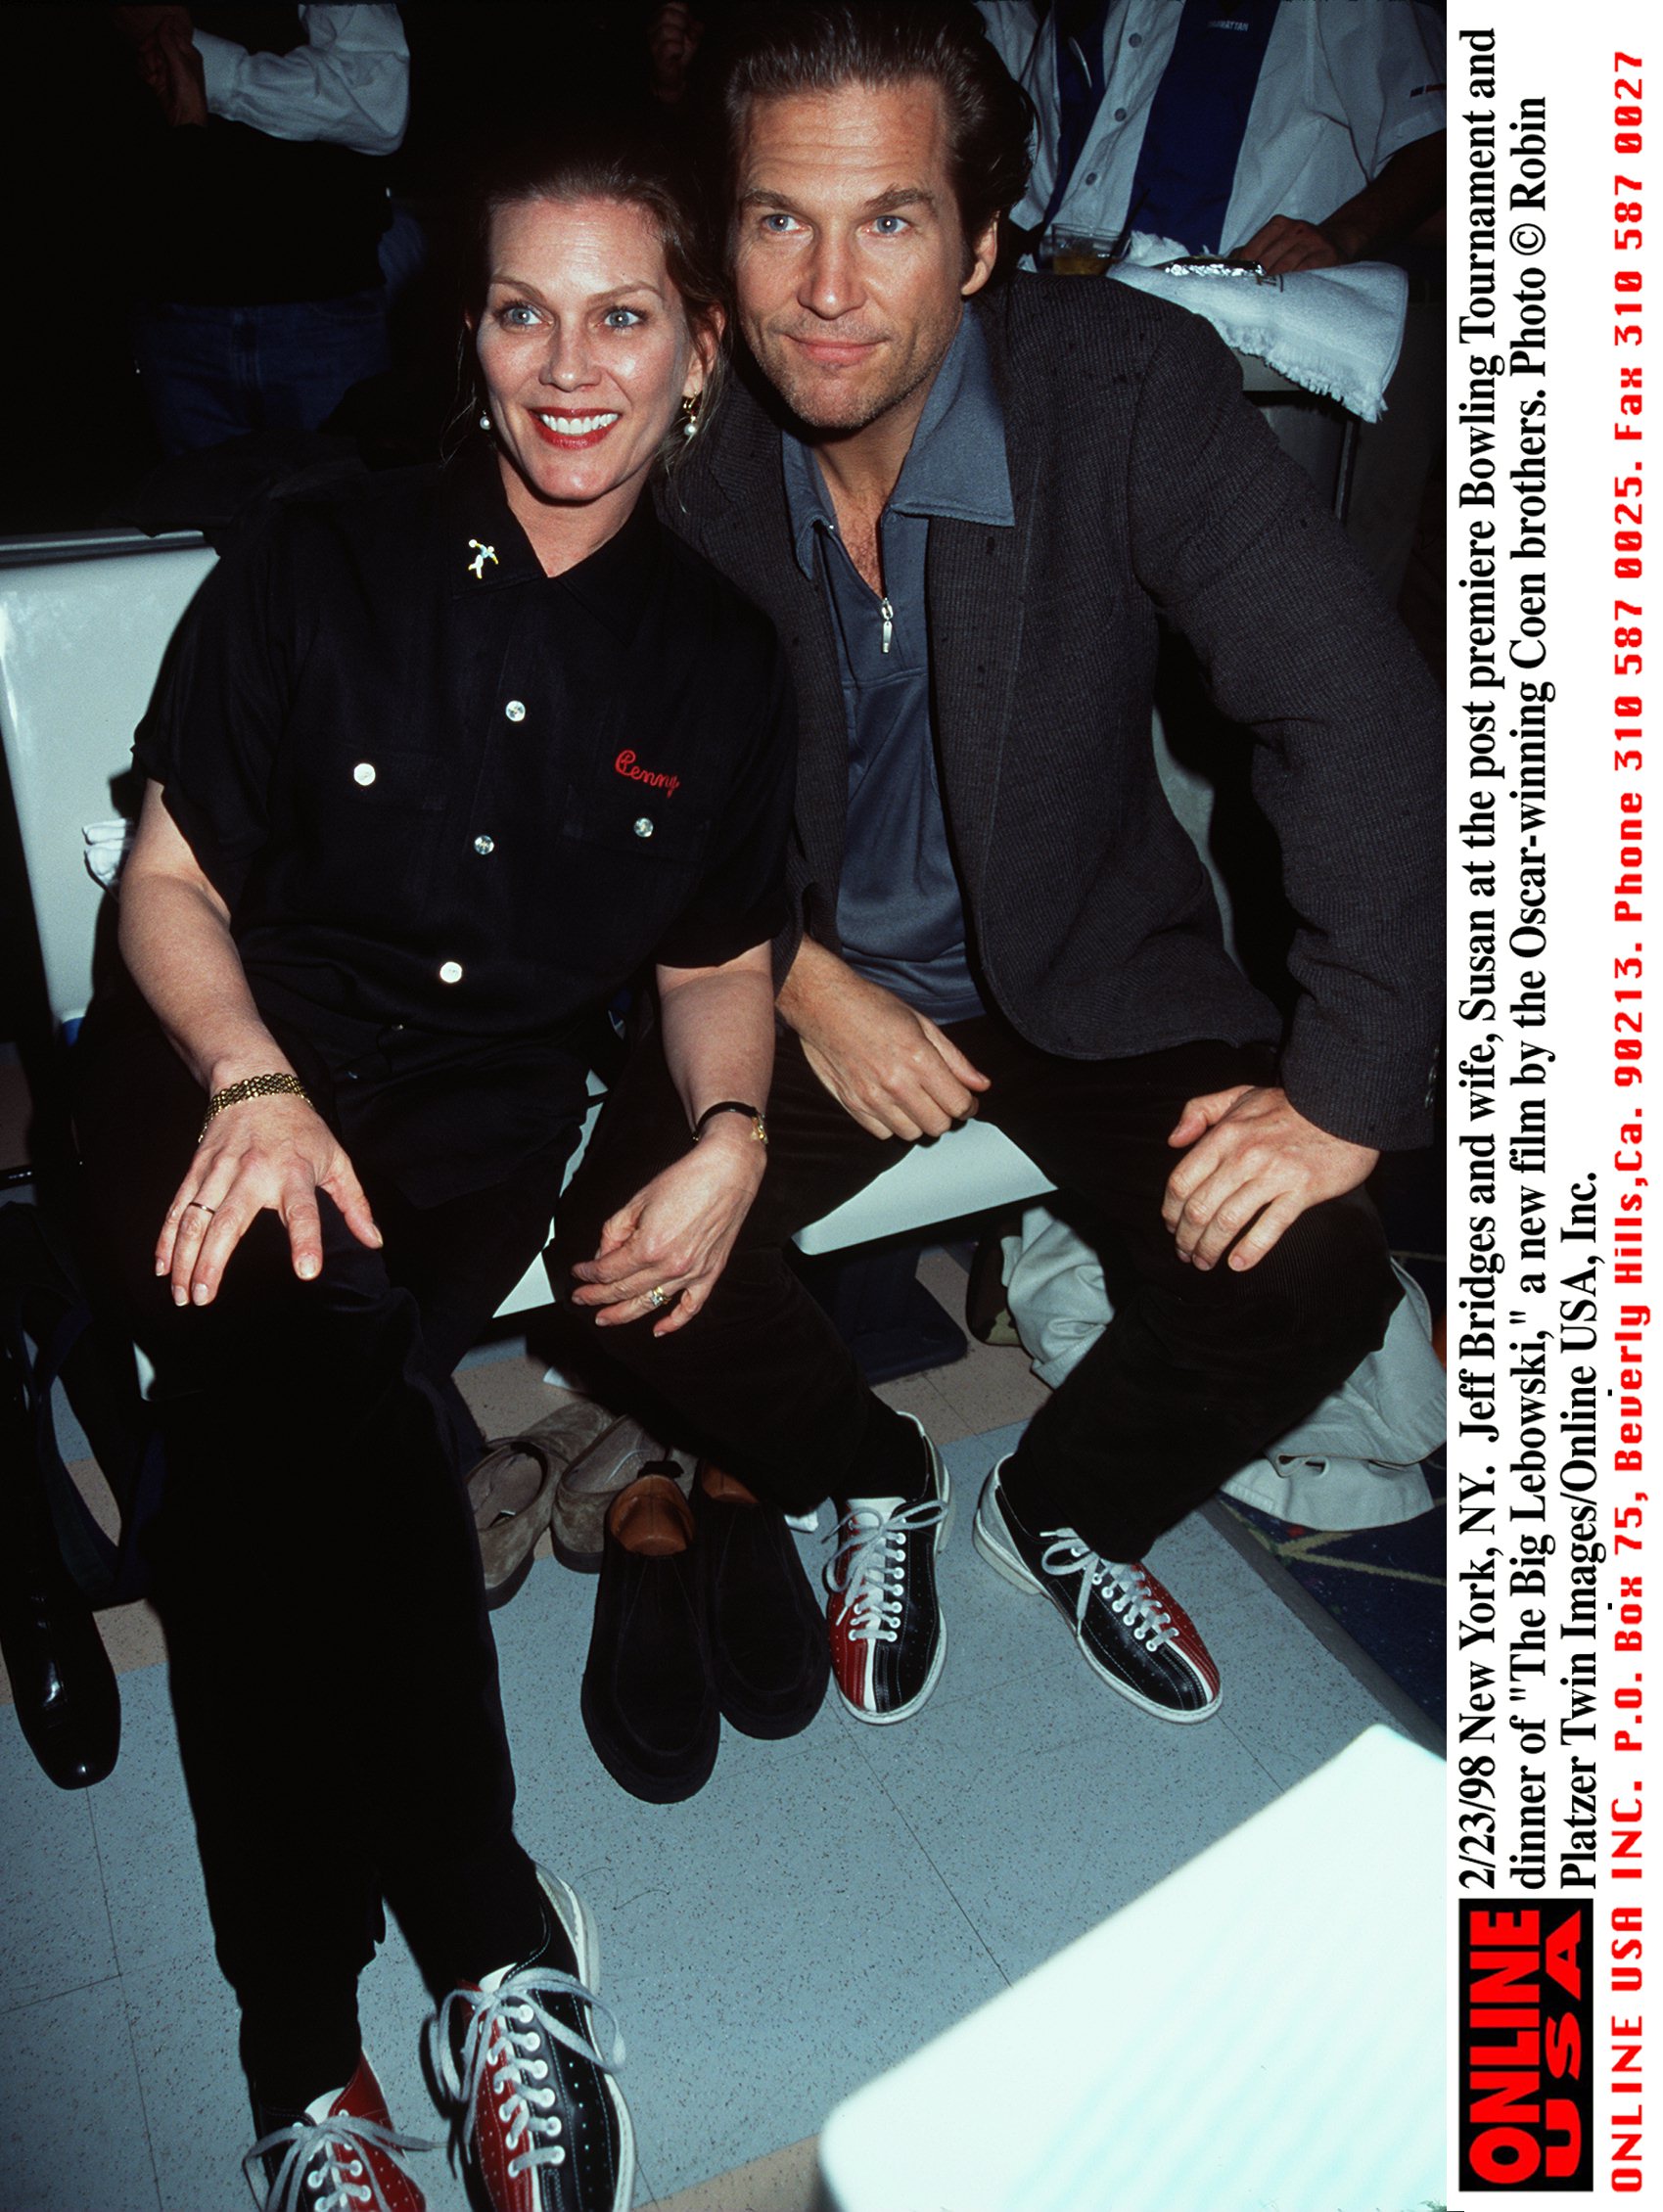 Susan and Jeff Bridges at the post-premiere bowling tournament and dinner for "The Big Lebowski," on February 23, 1998, in New York | Source: Getty Images